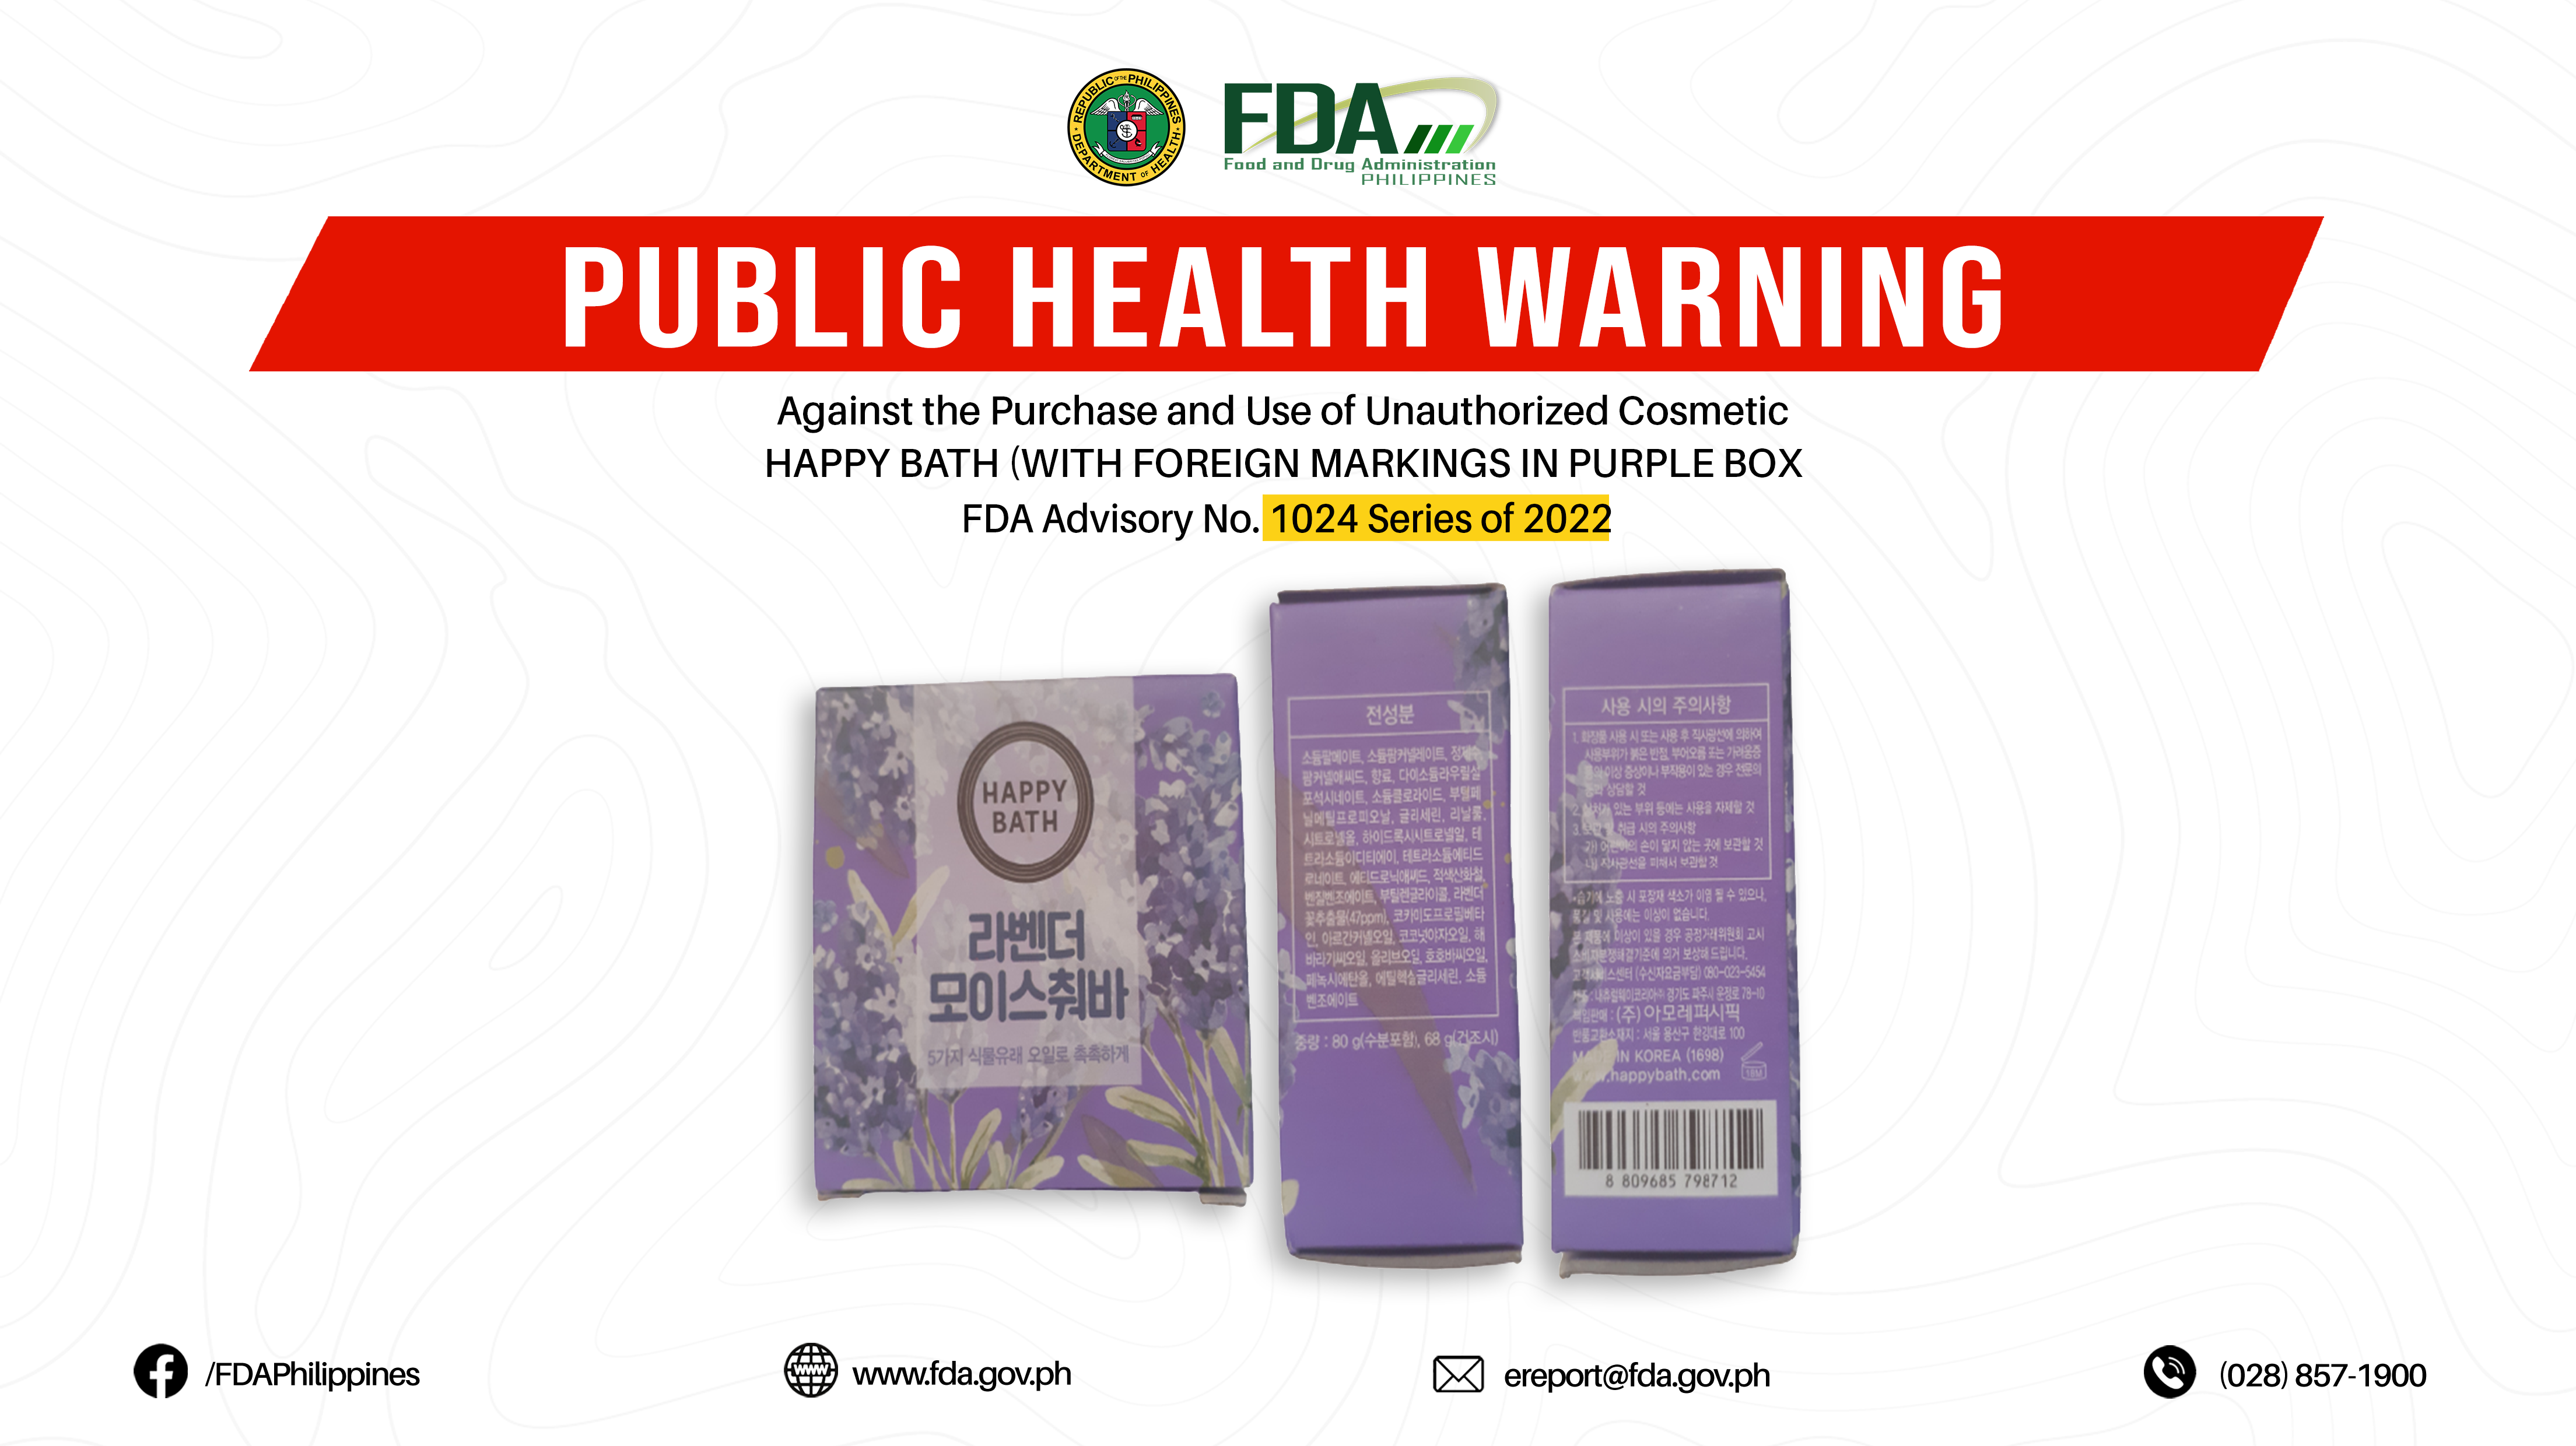 FDA Advisory No.2022-1024 || Public Health Warning Against the Purchase and Use of Unauthorized Cosmetic HAPPY BATH (WITH FOREIGN MARKINGS IN PURPLE BOX)